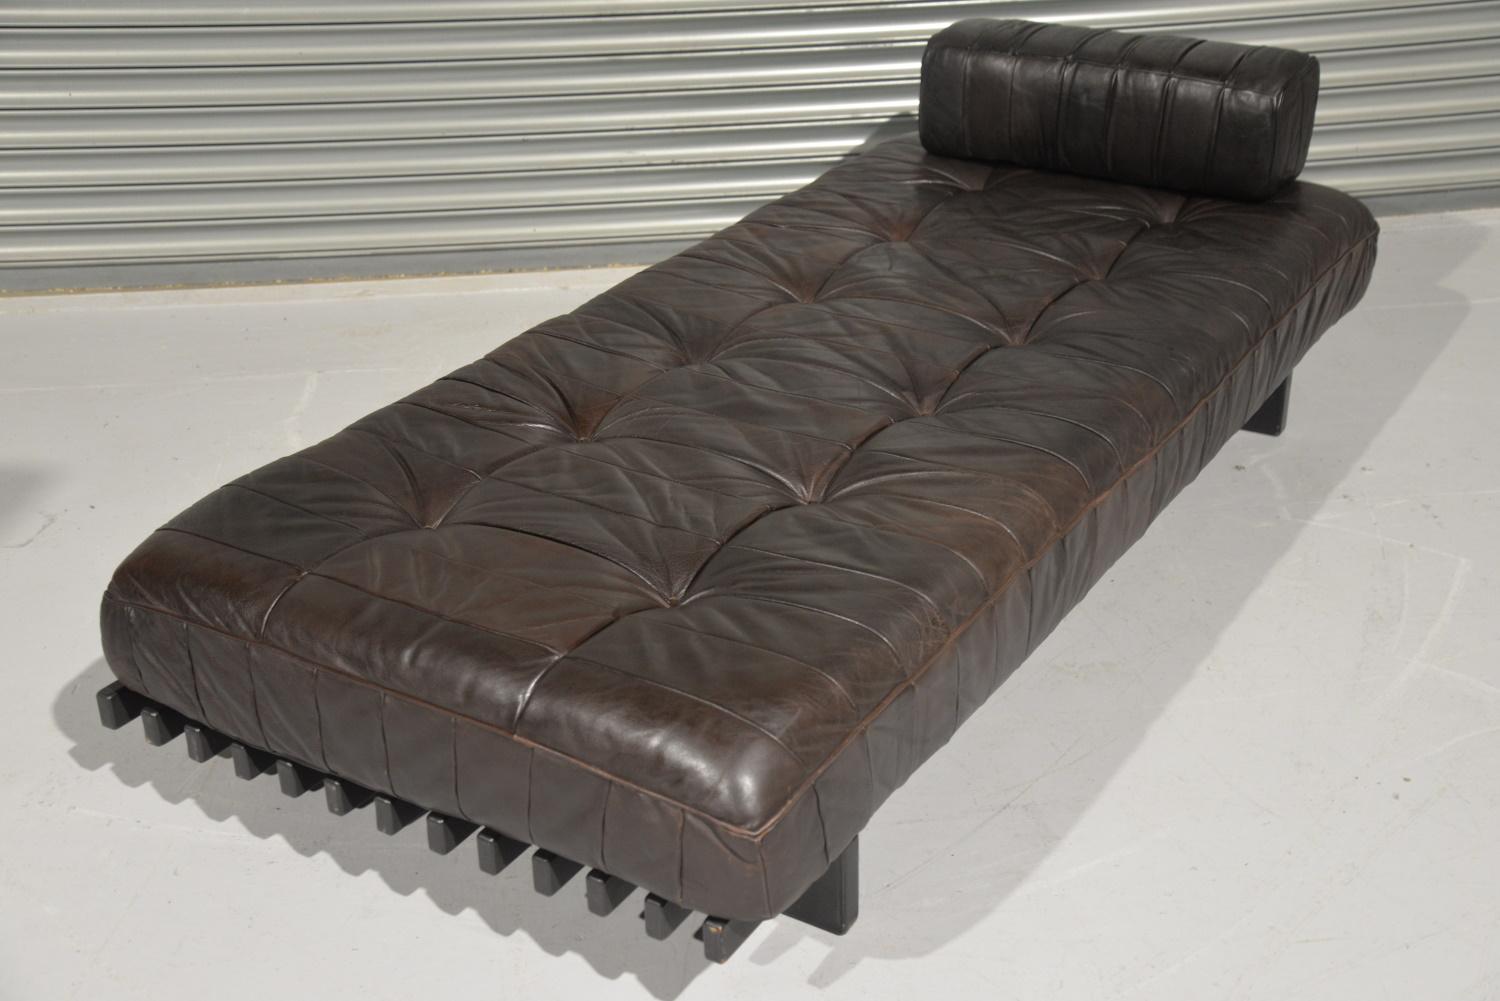 Vintage De Sede DS 80 Patchwork Leather Daybed, Switzerland, 1960s For Sale 8